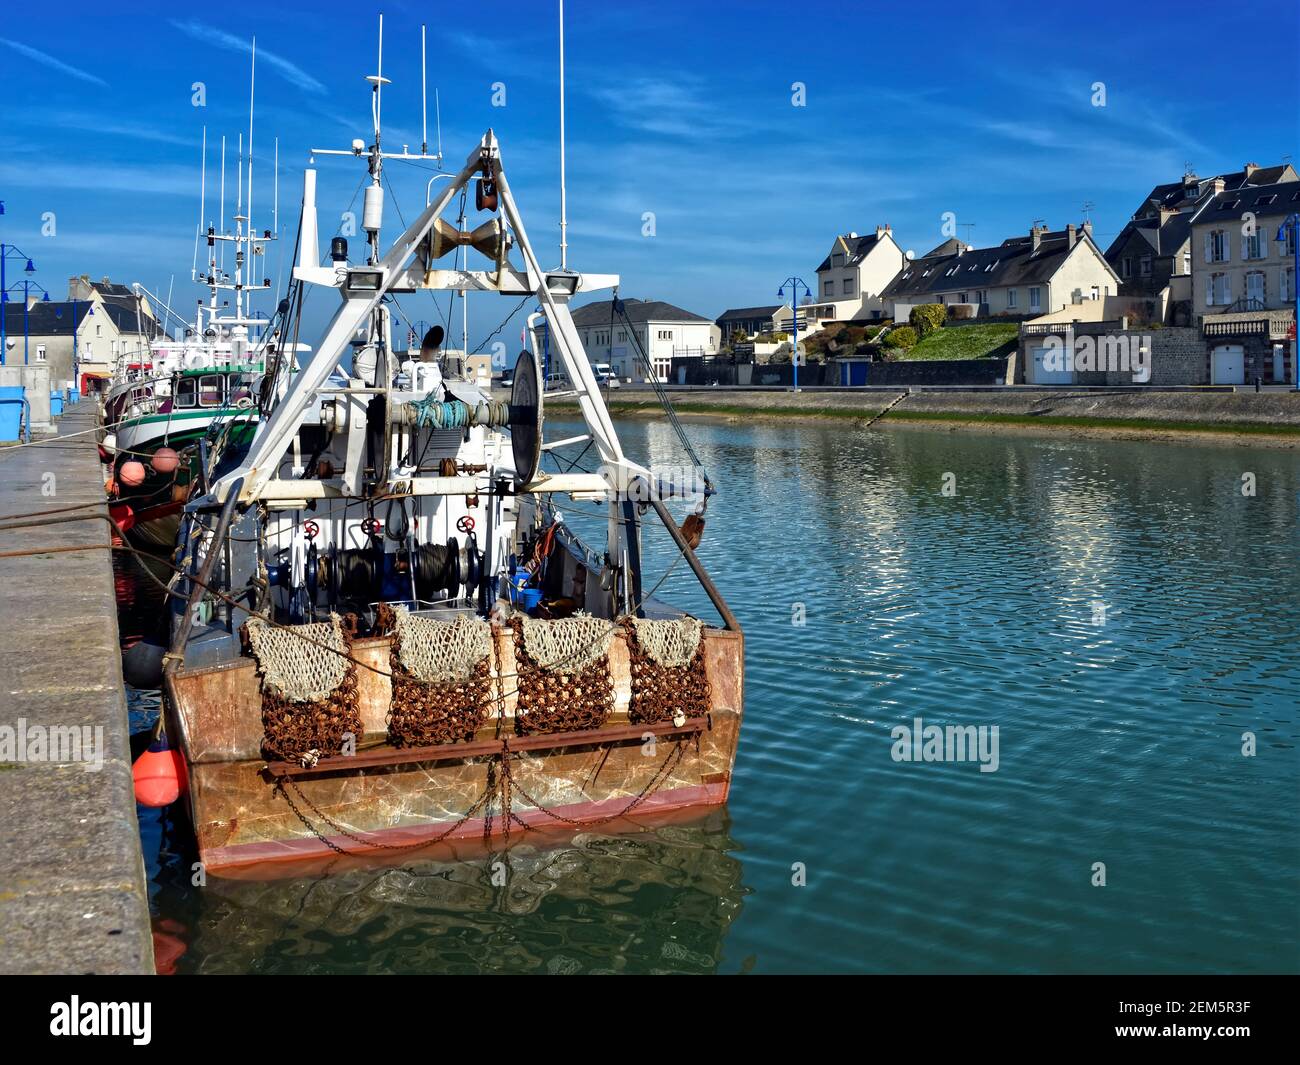 Fishing boat in Port-en-Bessin, a commune in the Calvados department in the Basse-Normandie region in northwestern France Stock Photo